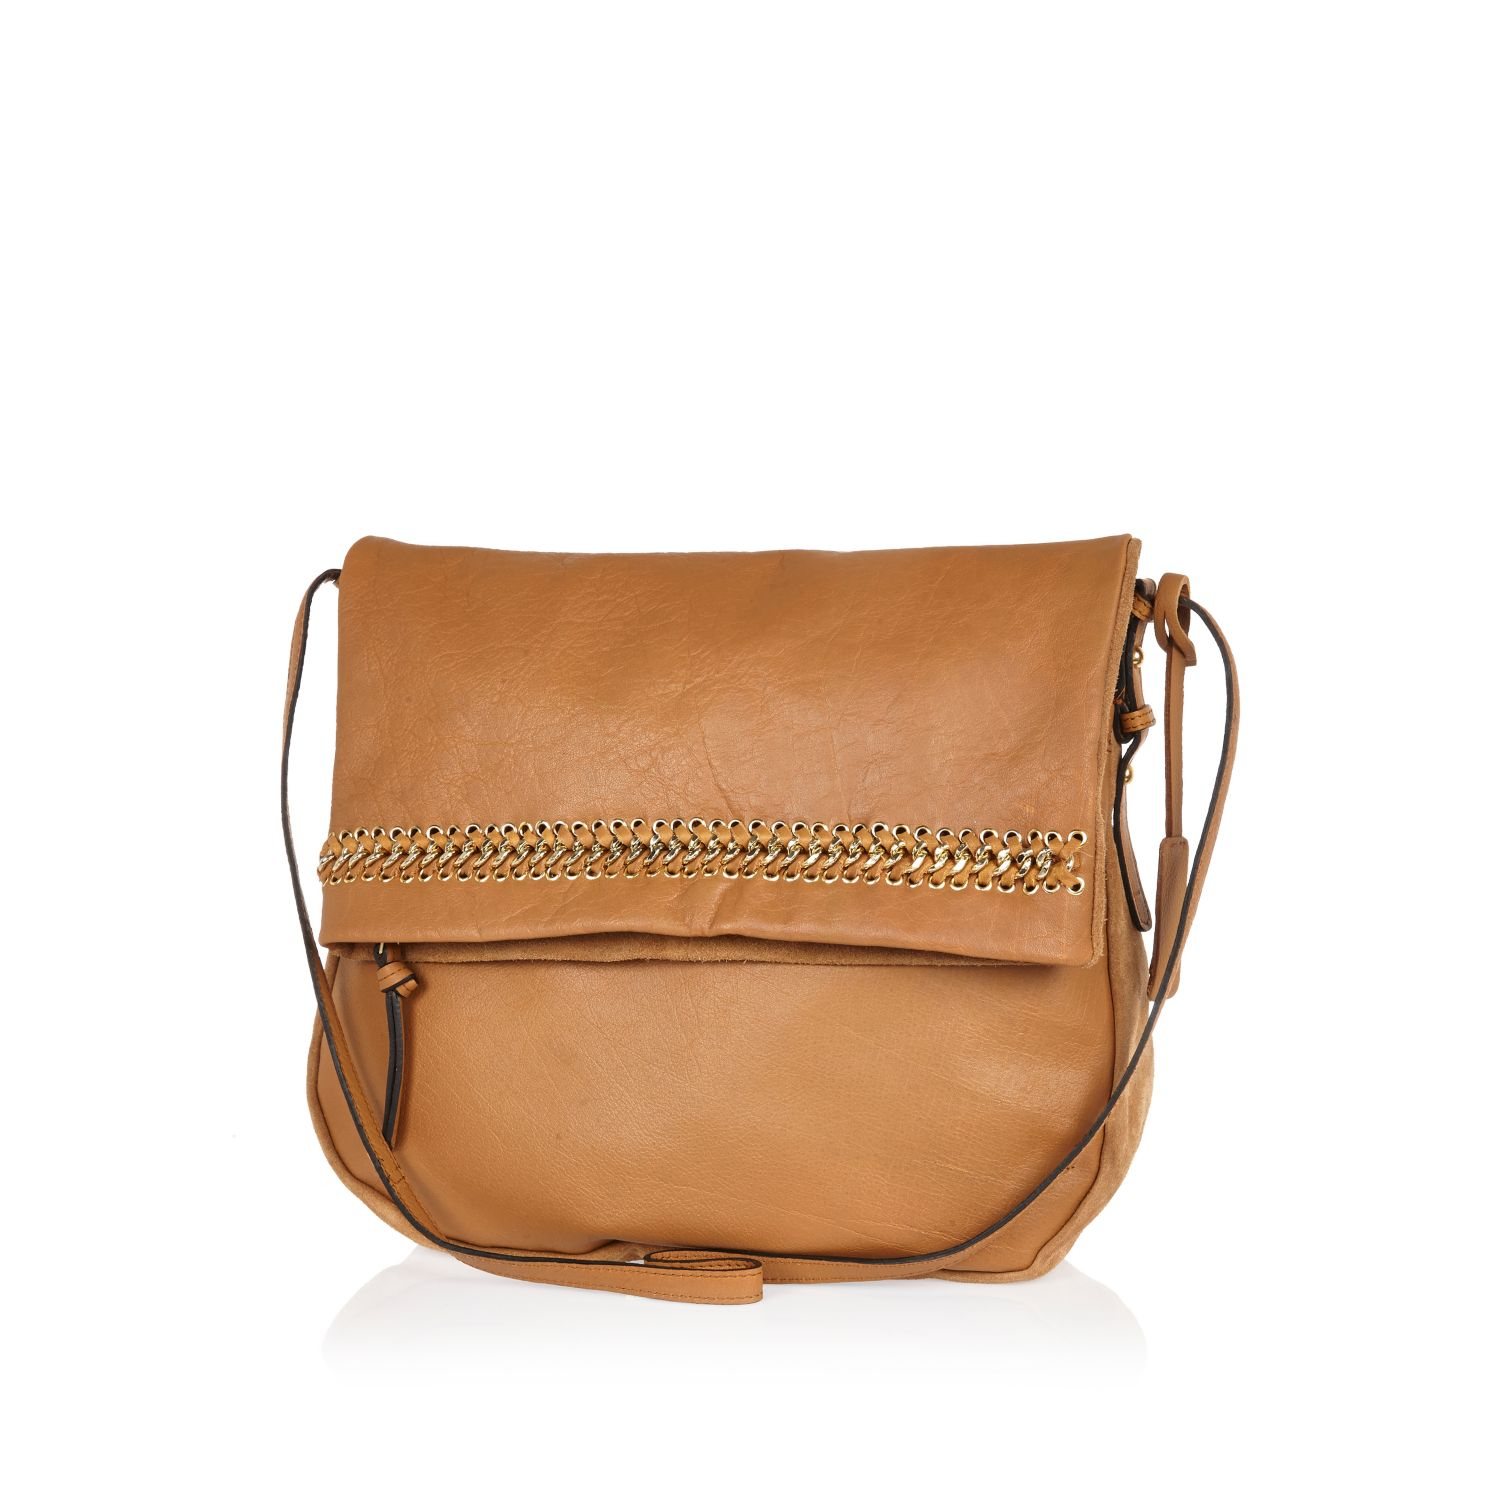 River Island Tan Leather Fold Over Messenger Bag in Brown (tan) | Lyst